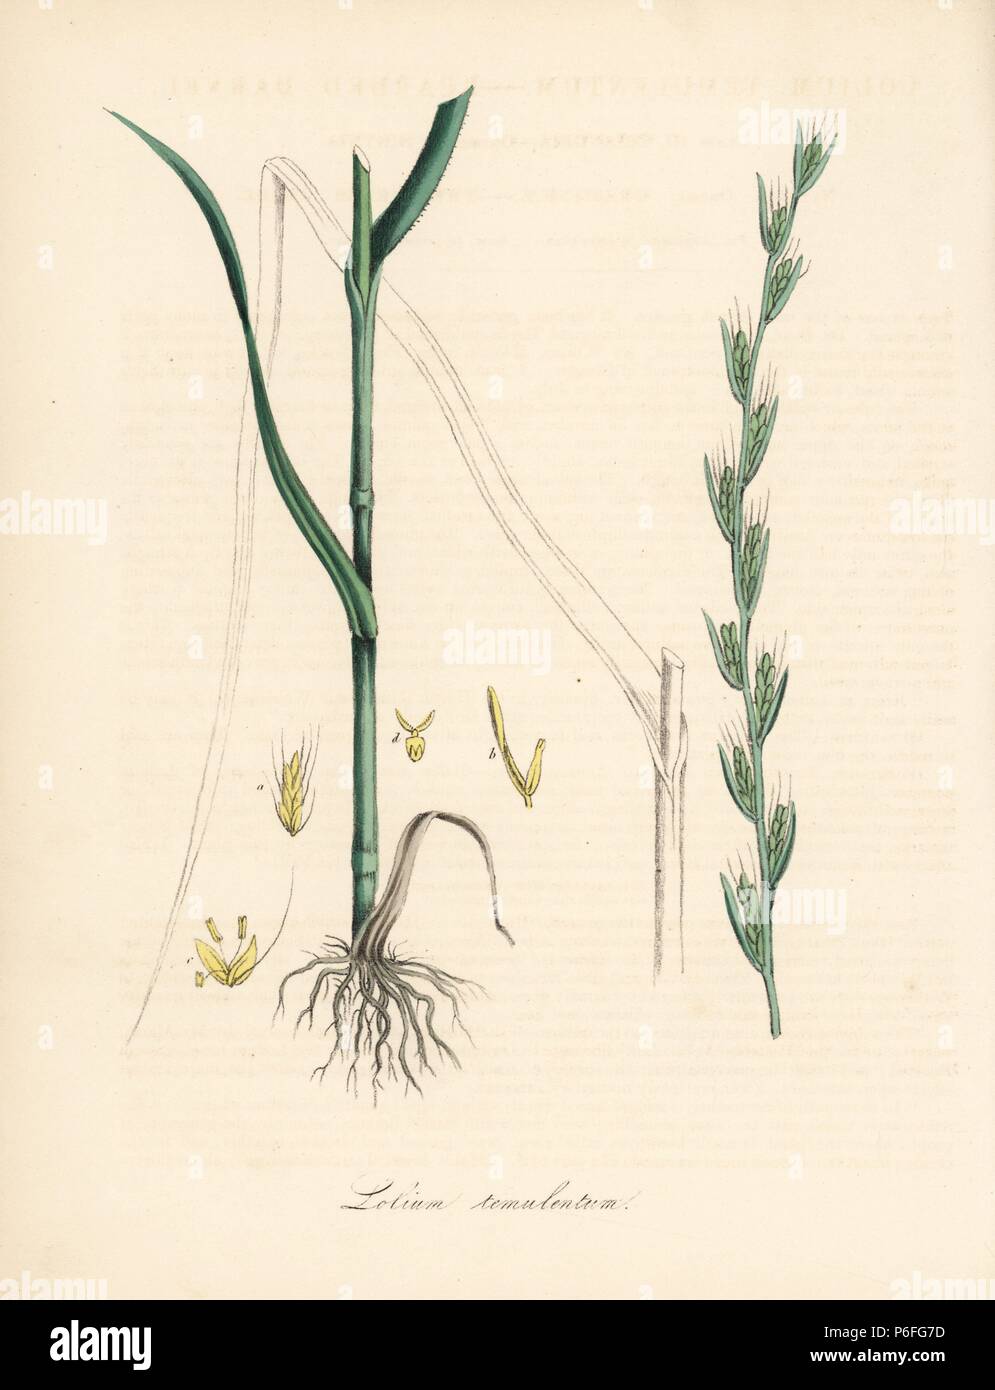 Bearded darnel or poison darnel, Lolium temulentum, with stalk, leaf, roots and seed. Handcoloured zincograph by C. Chabot drawn by Miss M. A. Burnett from her 'Plantae Utiliores: or Illustrations of Useful Plants,' Whittaker, London, 1842. Miss Burnett drew the botanical illustrations, but the text was chiefly by her late brother, British botanist Gilbert Thomas Burnett (1800-1835). Stock Photo